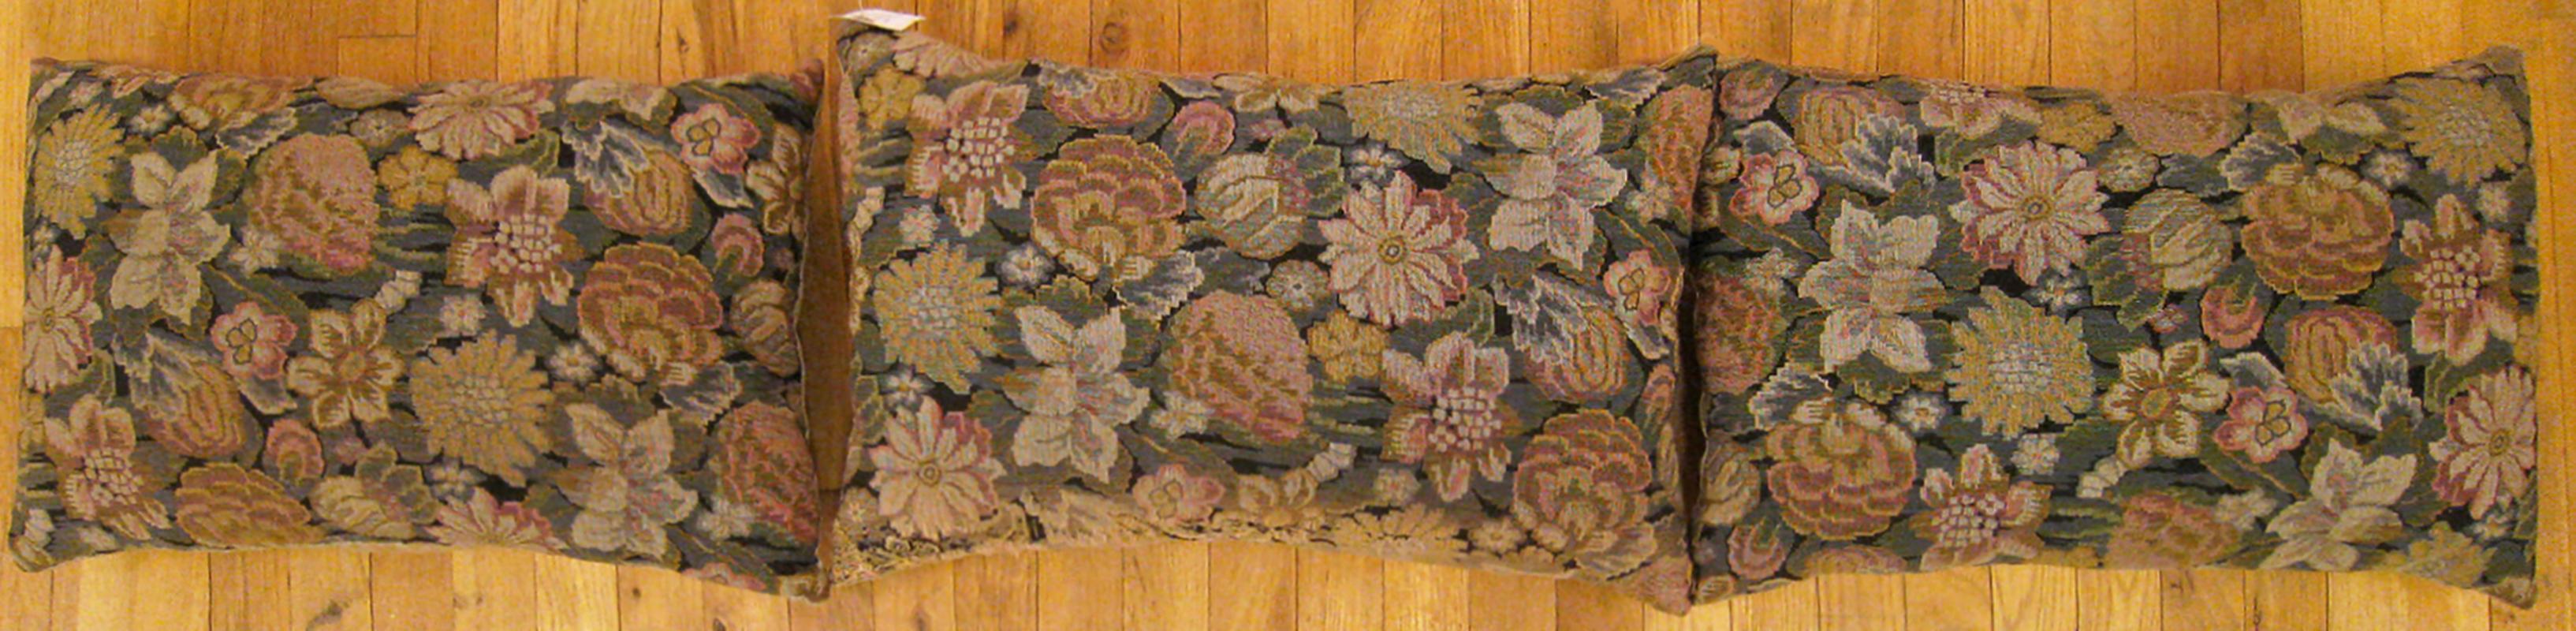 A set of antique jacquard tapestry pillows ; size 1'4” x 2'0” and 1'3” x 1'11”.

An antique decorative pillows with floral elements allover a gold gray central field, size 1'4